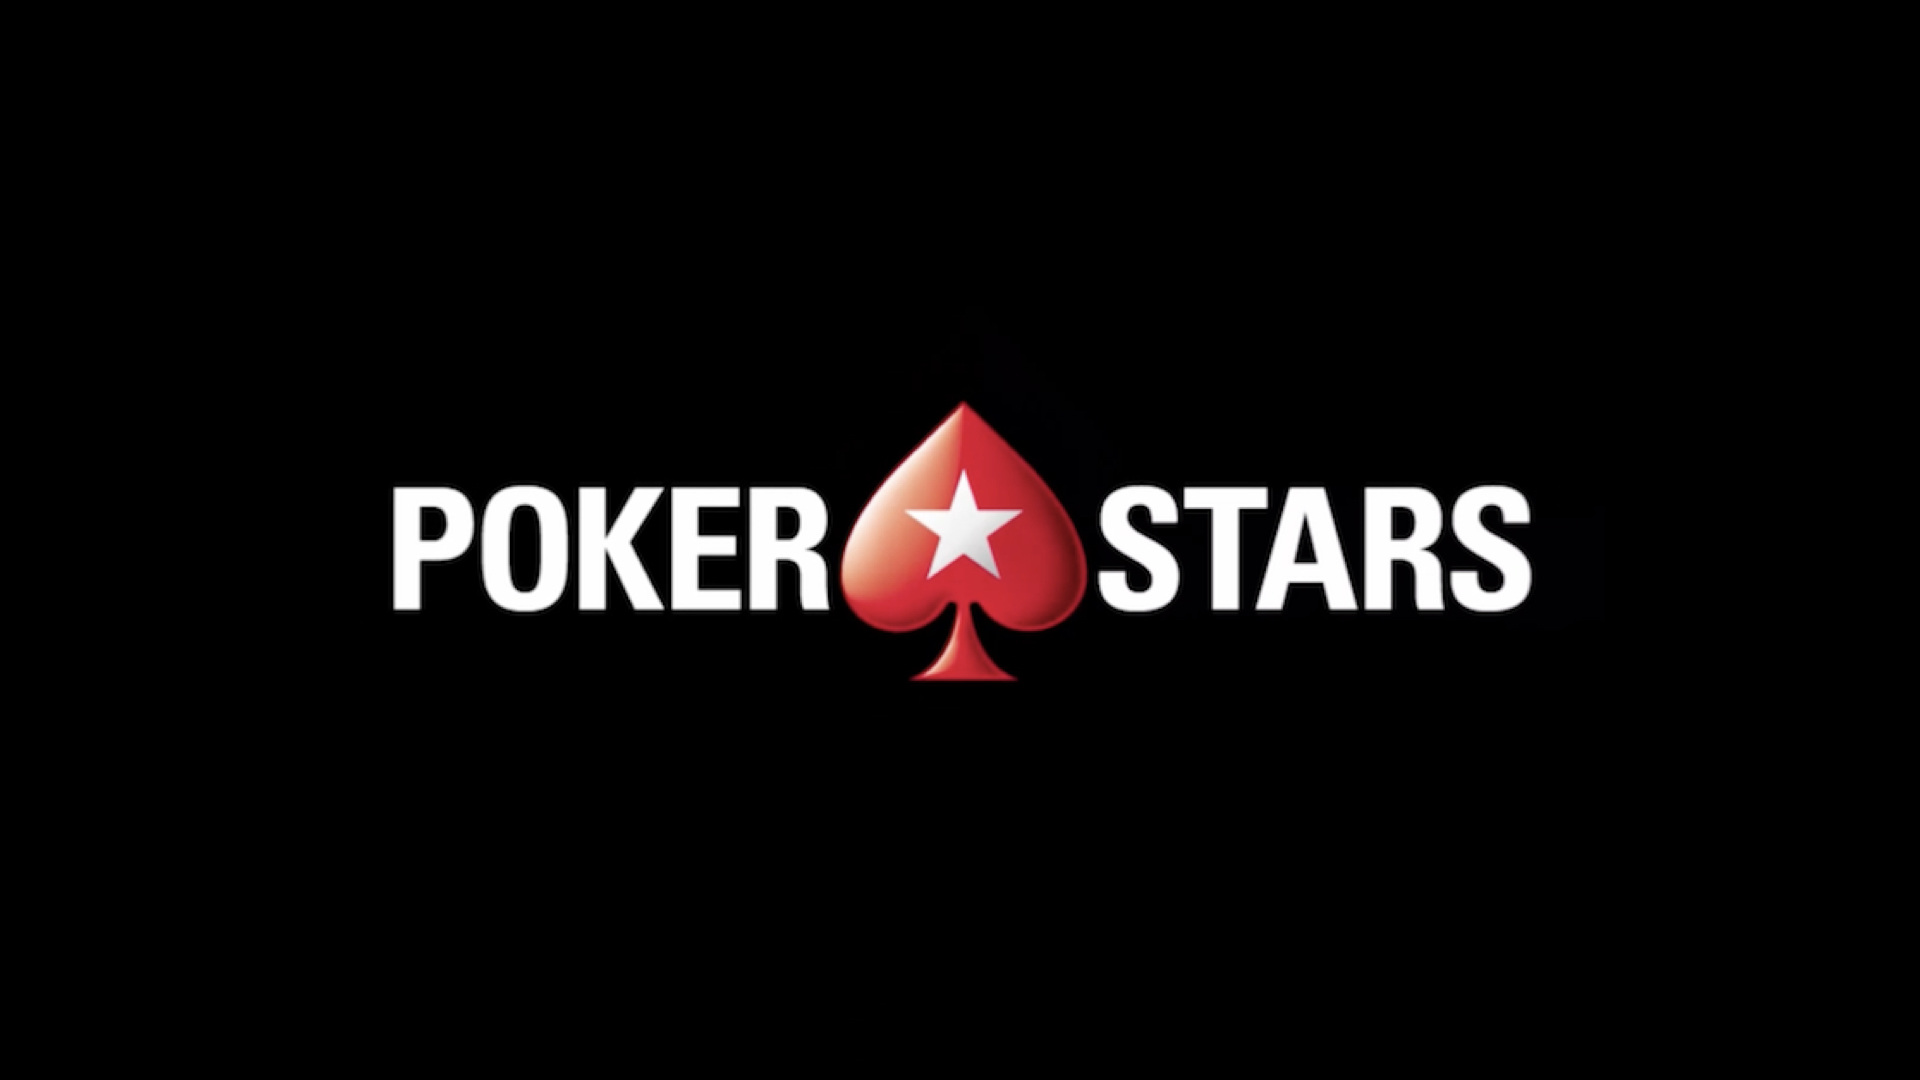 Poker Stars App: Incredible Game Play With Sensational Graphics And A Sensational Poker Experience